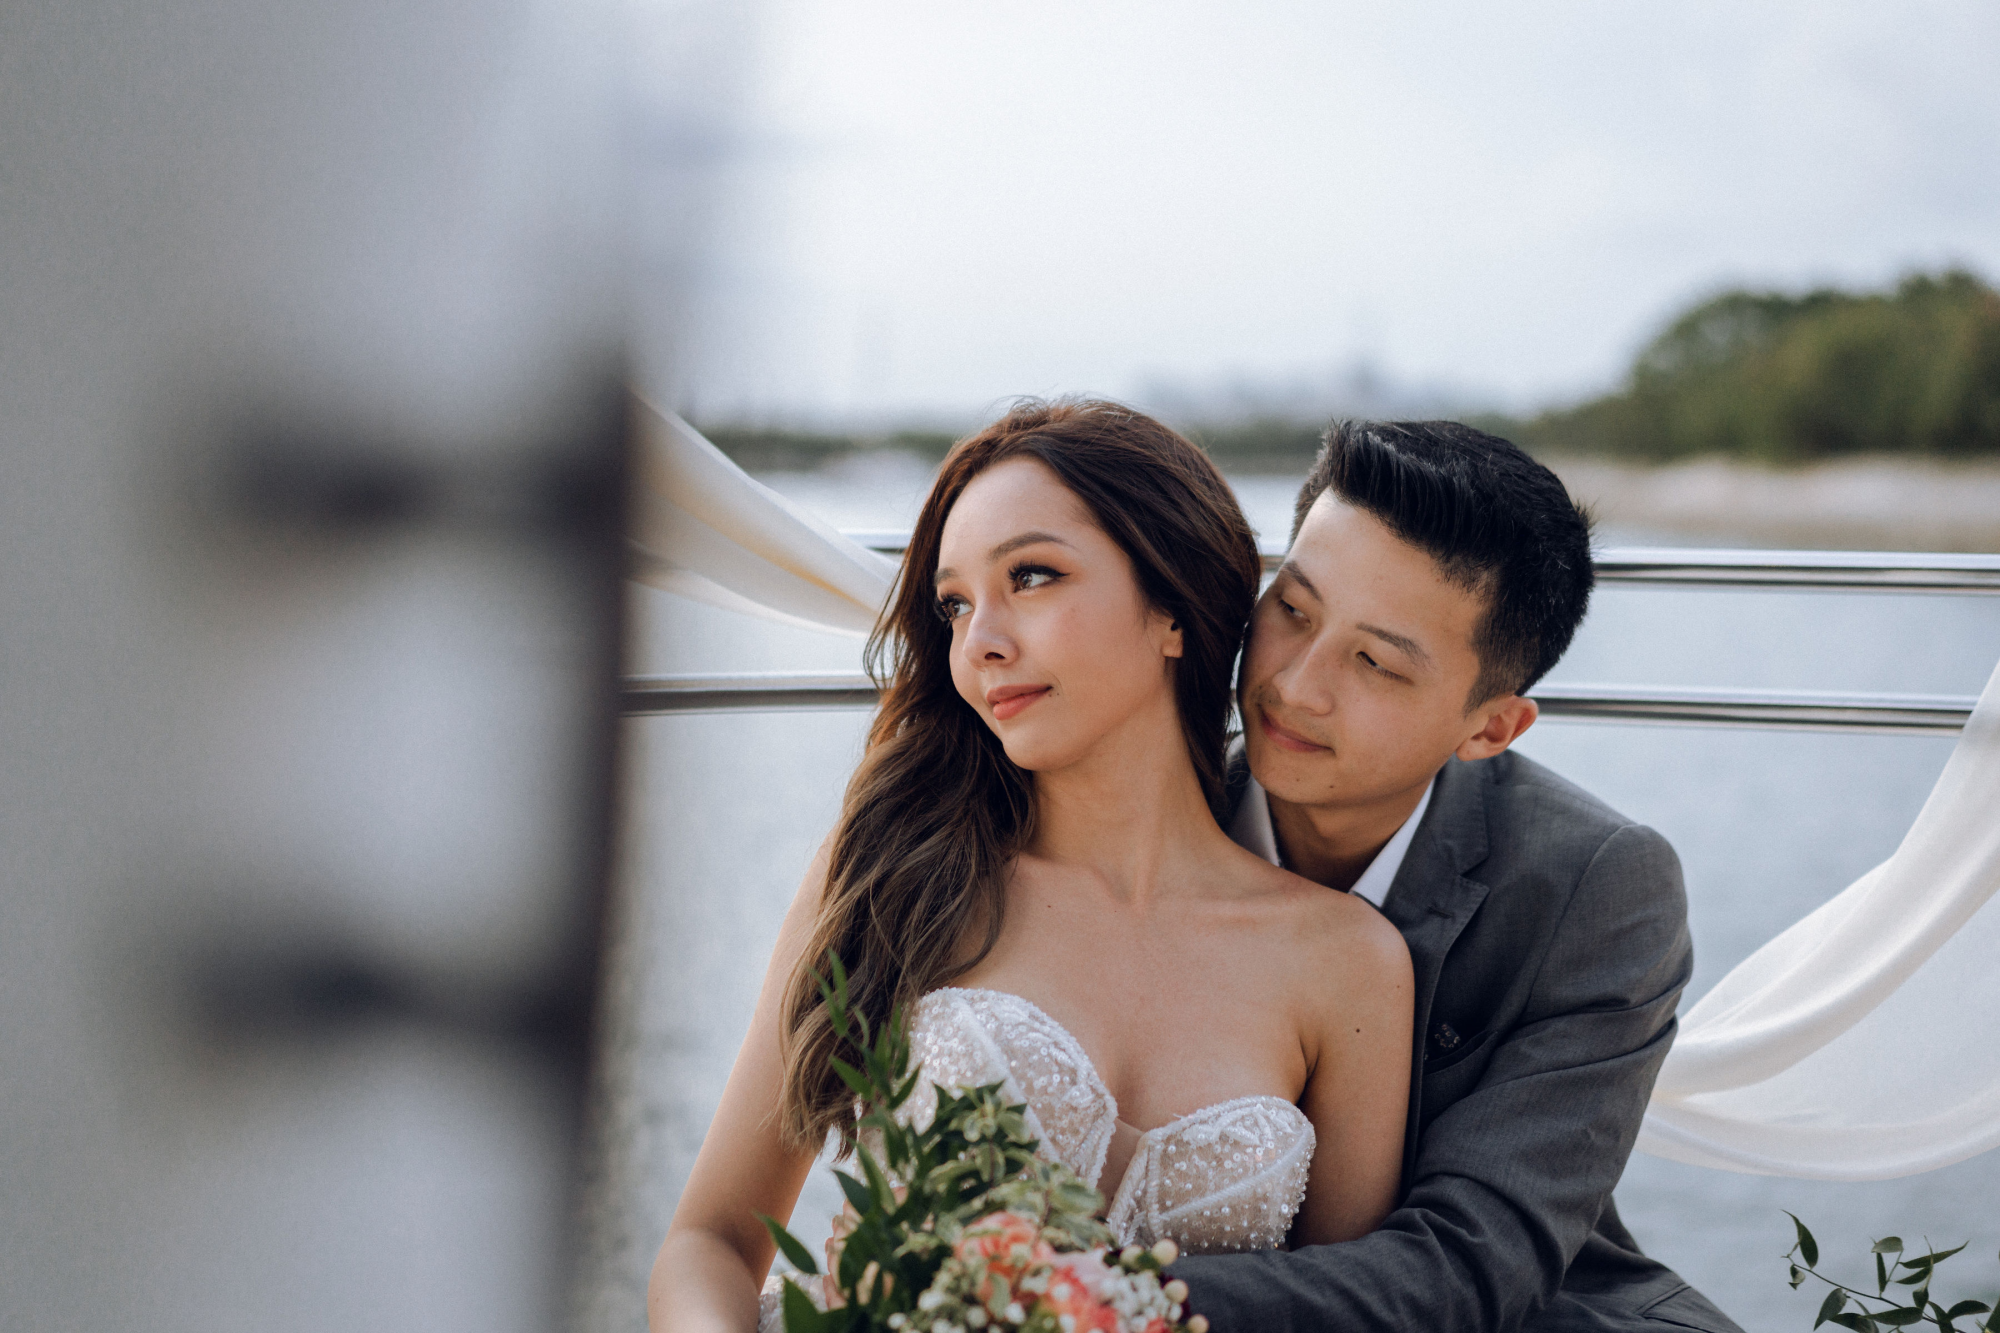 Sunset Prewedding Photoshoot On A Yacht With Romantic Floral Styling by Samantha on OneThreeOneFour 18